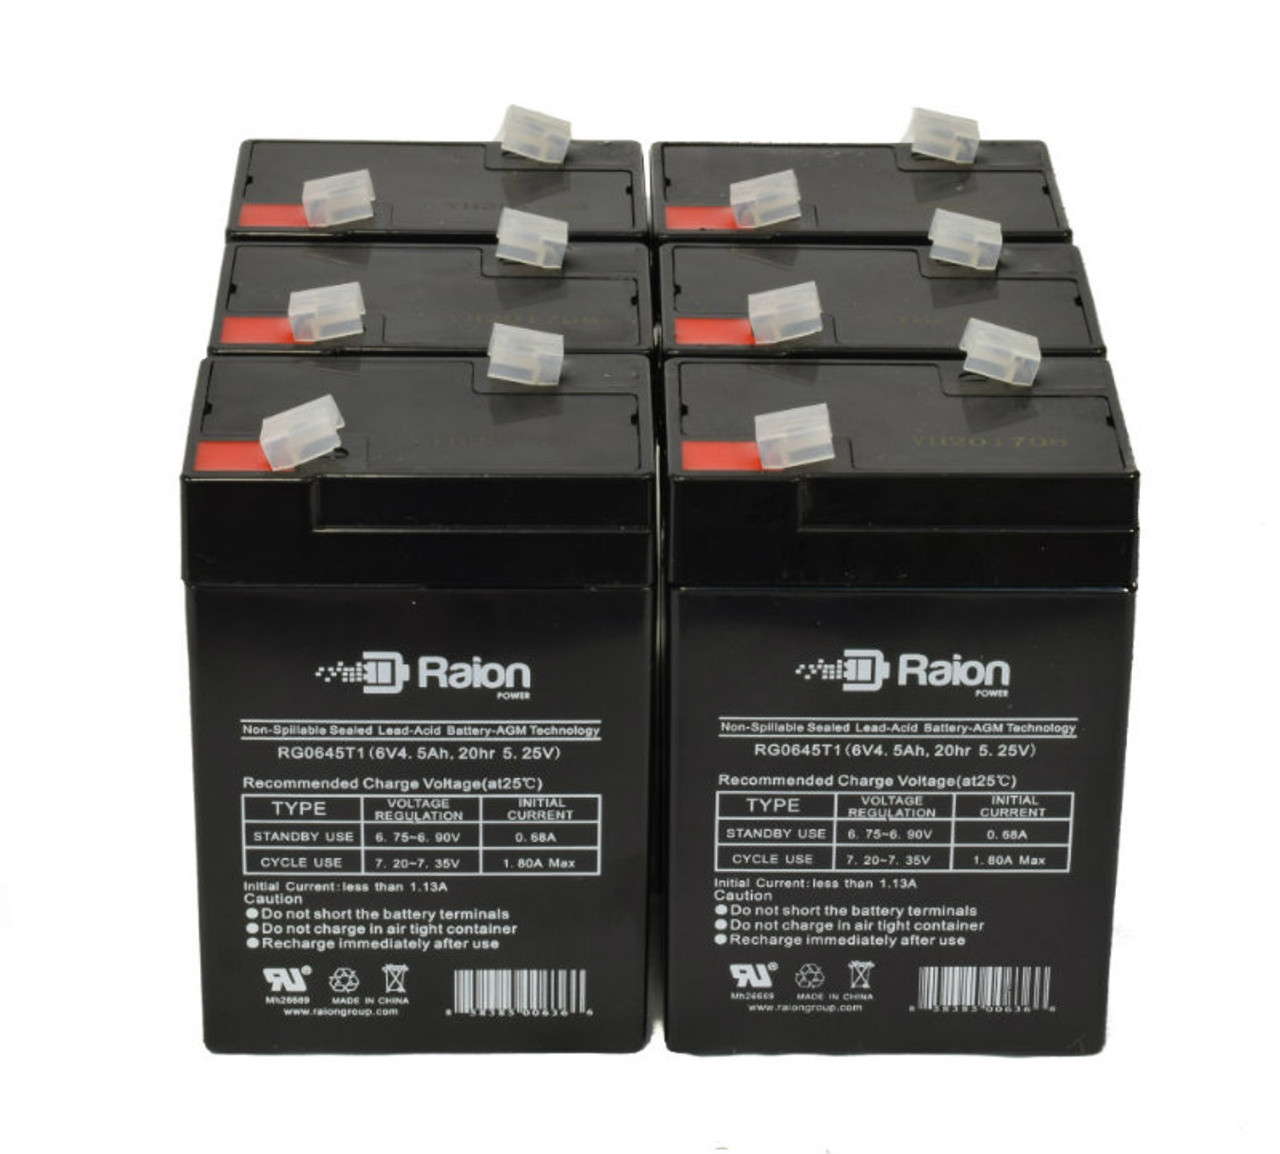 Raion Power 6 Volt 4.5Ah RG0645T1 Replacement Battery for Sunnyway SW650(II) - 6 Pack